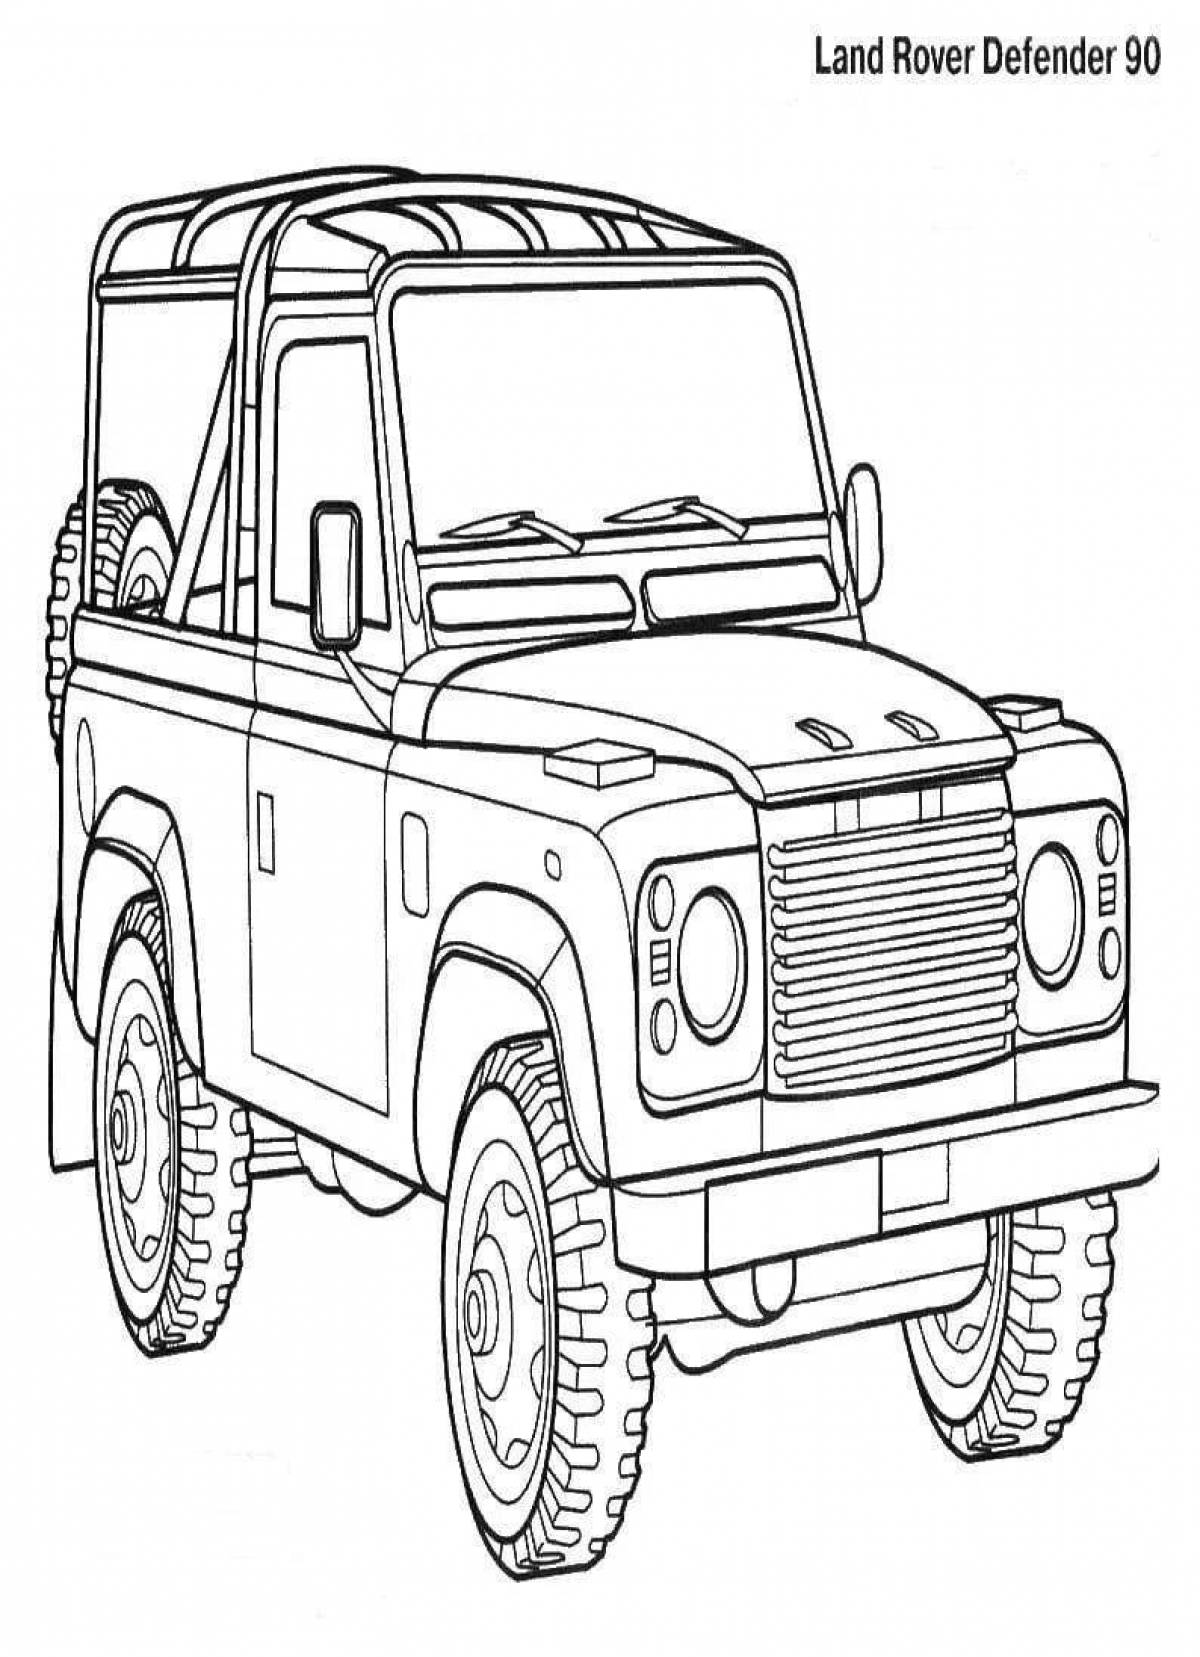 Coloring range rover for kids